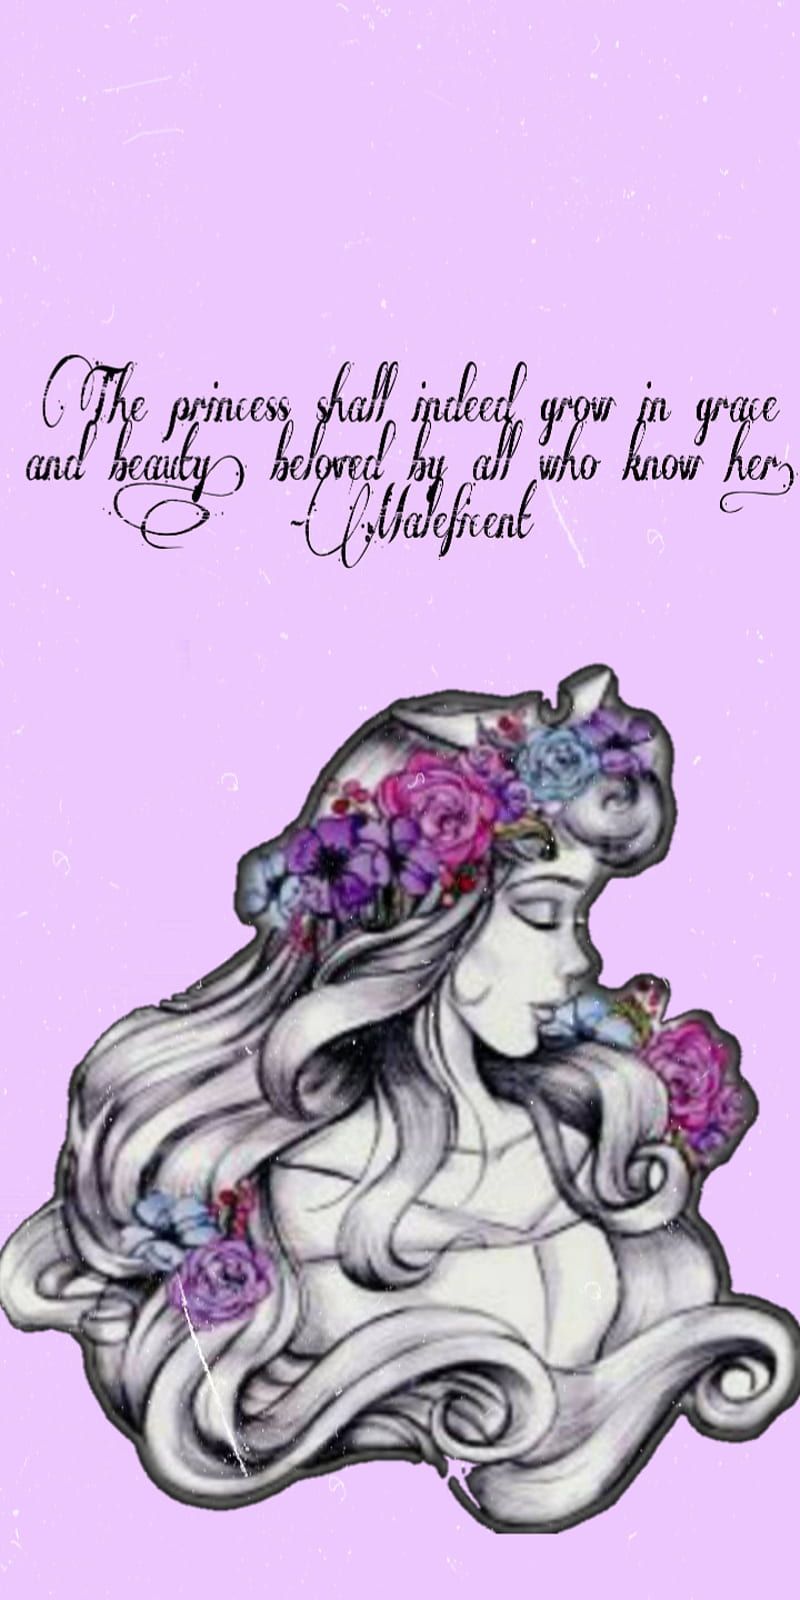 A quote from the princess and her flower - Beautiful